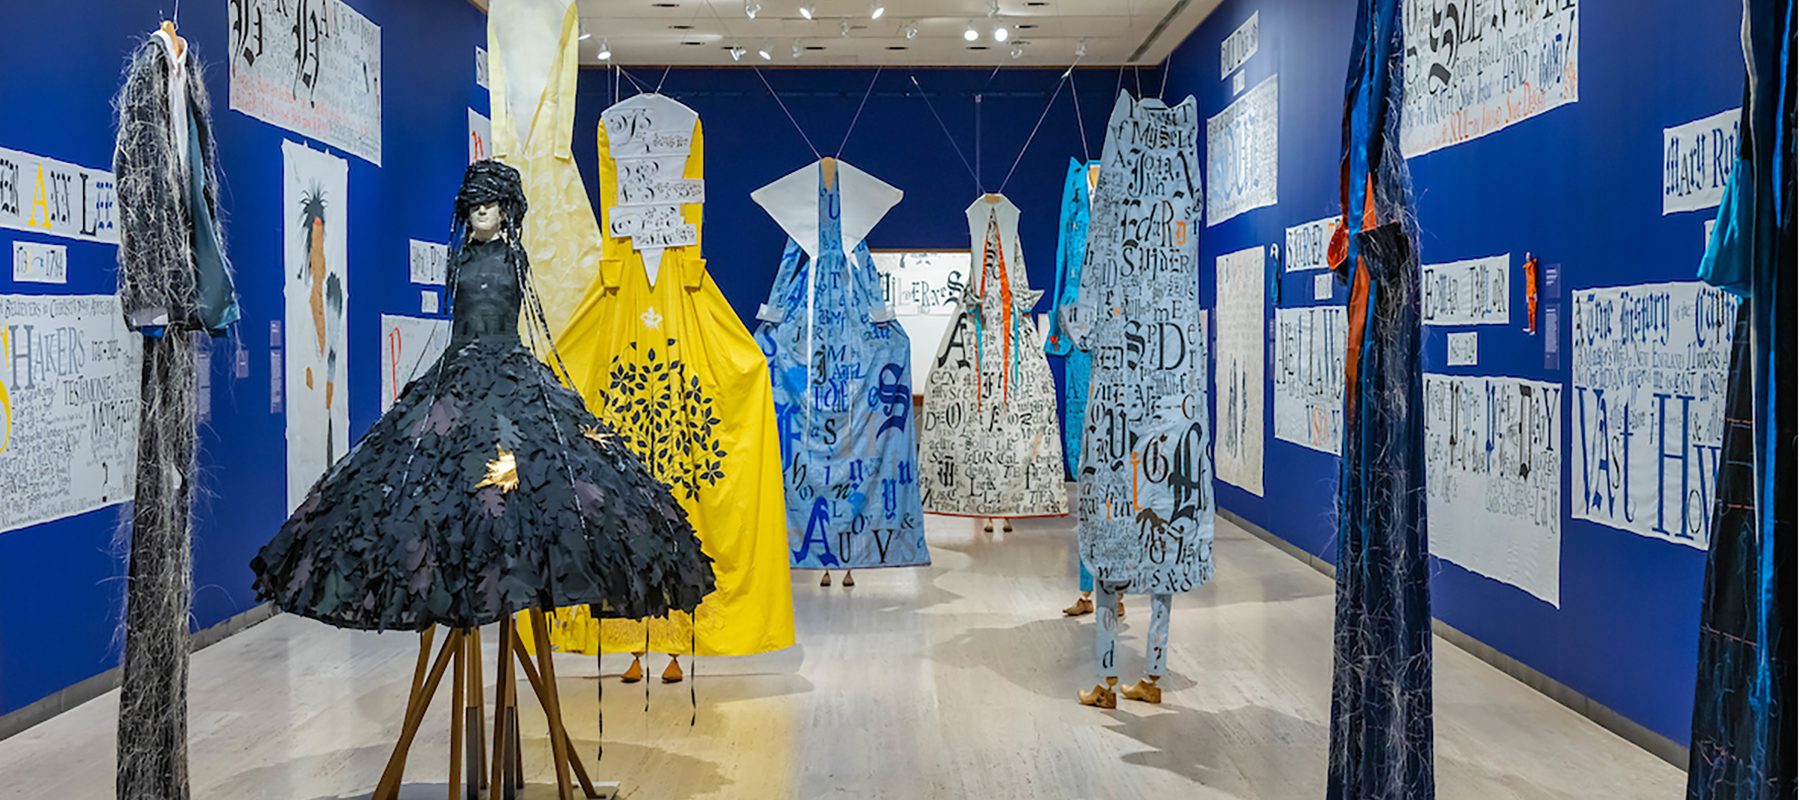 Seven sculptures shaped like dresses are positioned in a blue room.